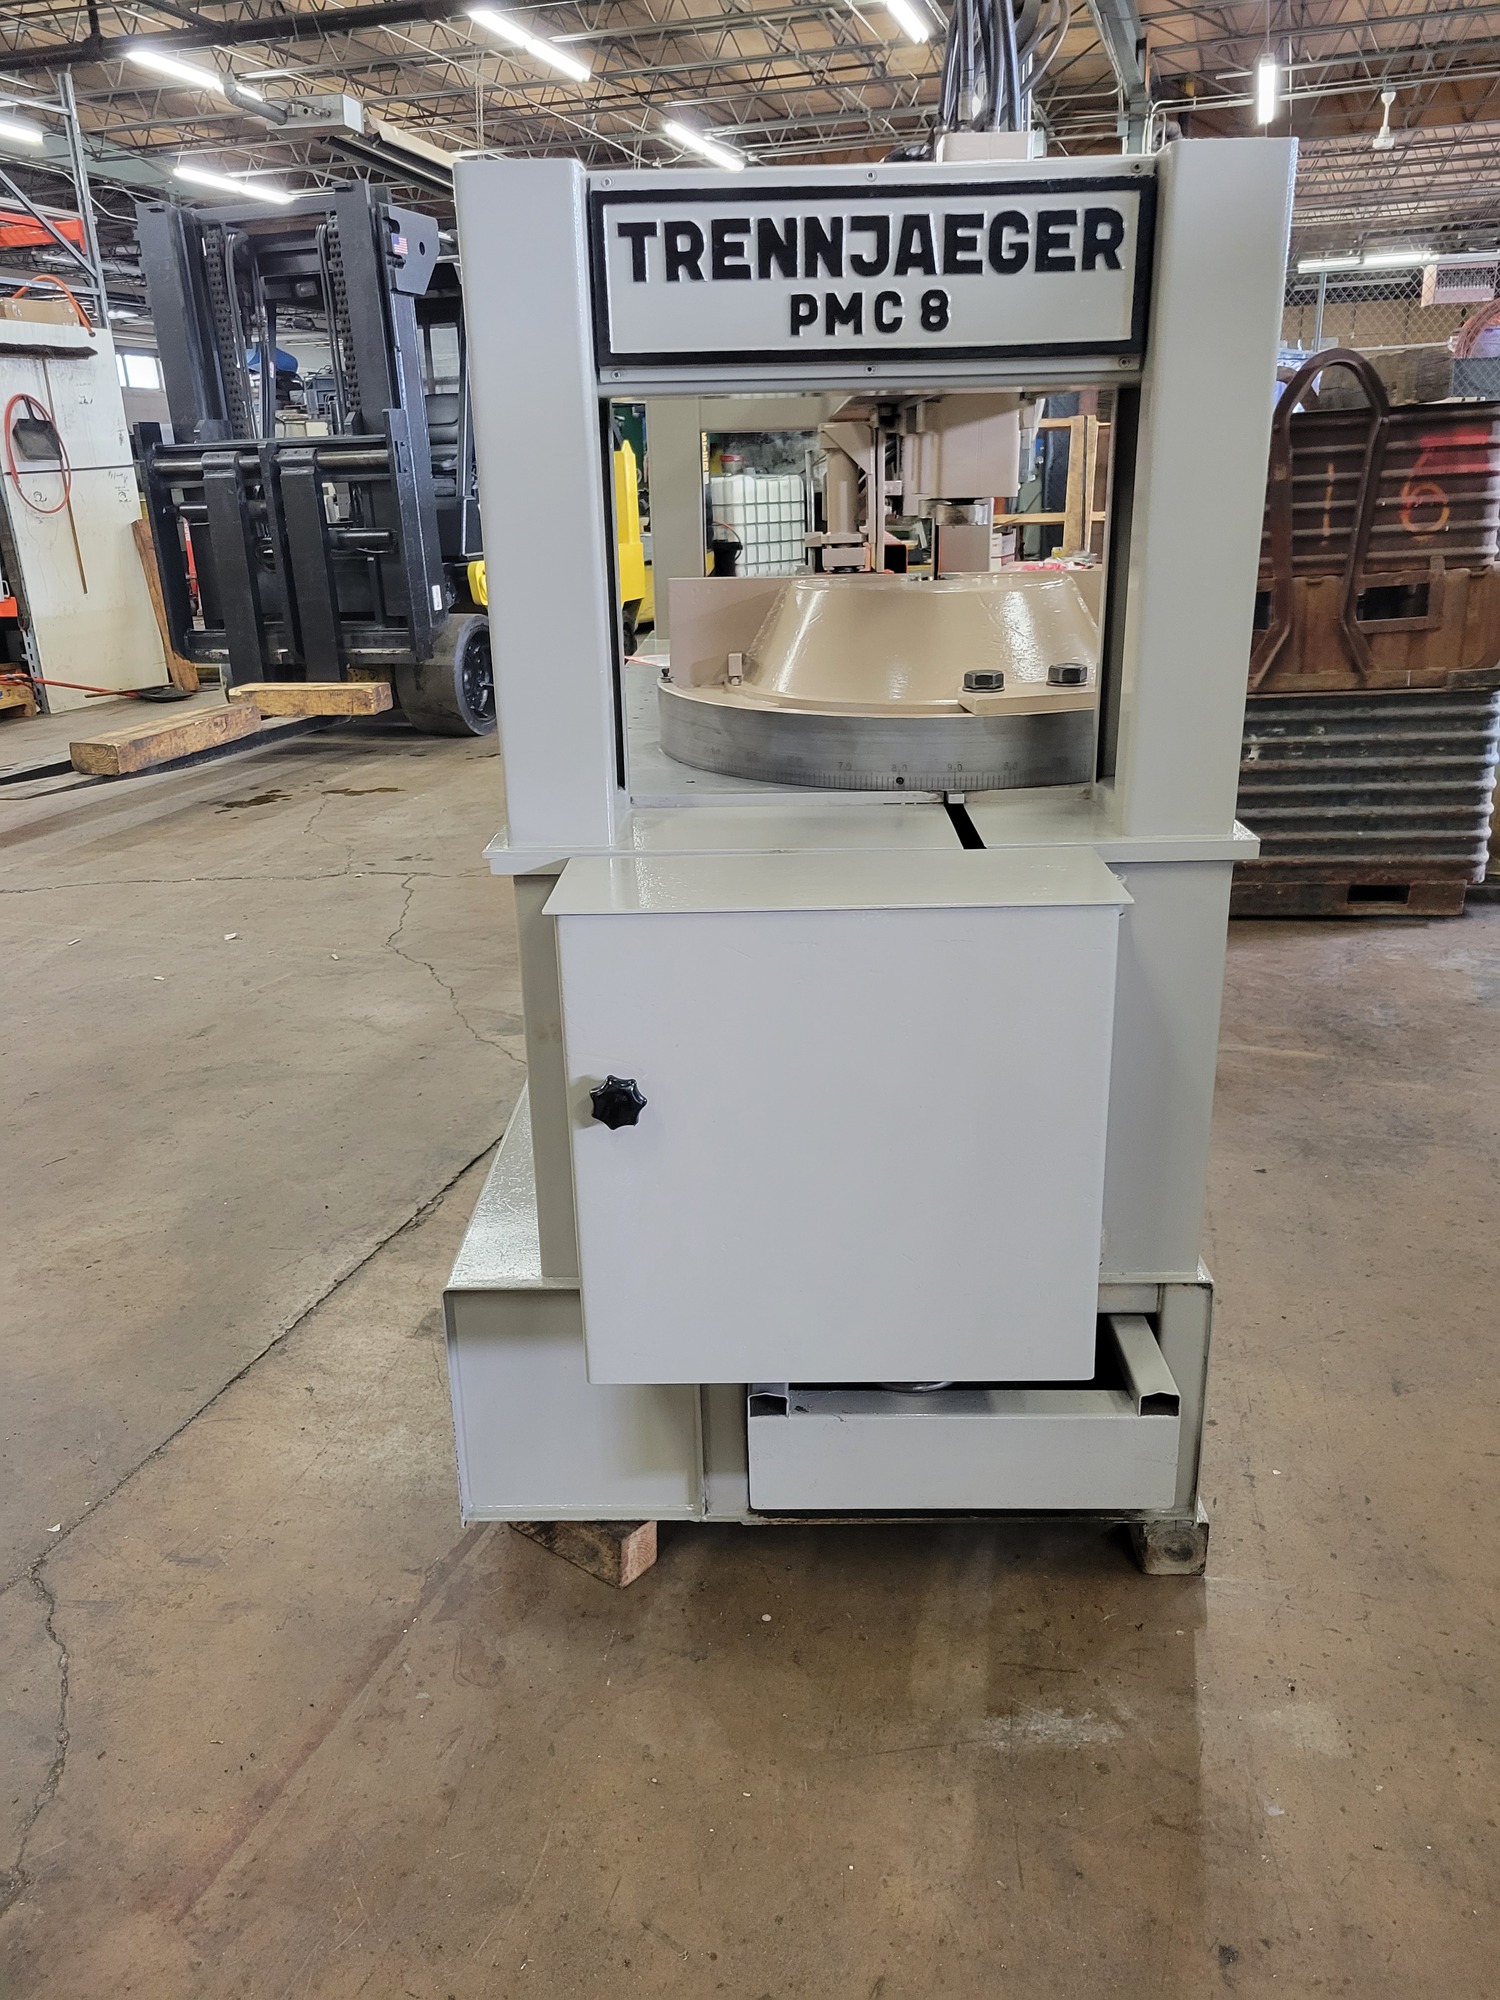 TRENNJAEGER PMC8-36" Circular or Mitre Cold Saws | Myers Technology Co., LLC